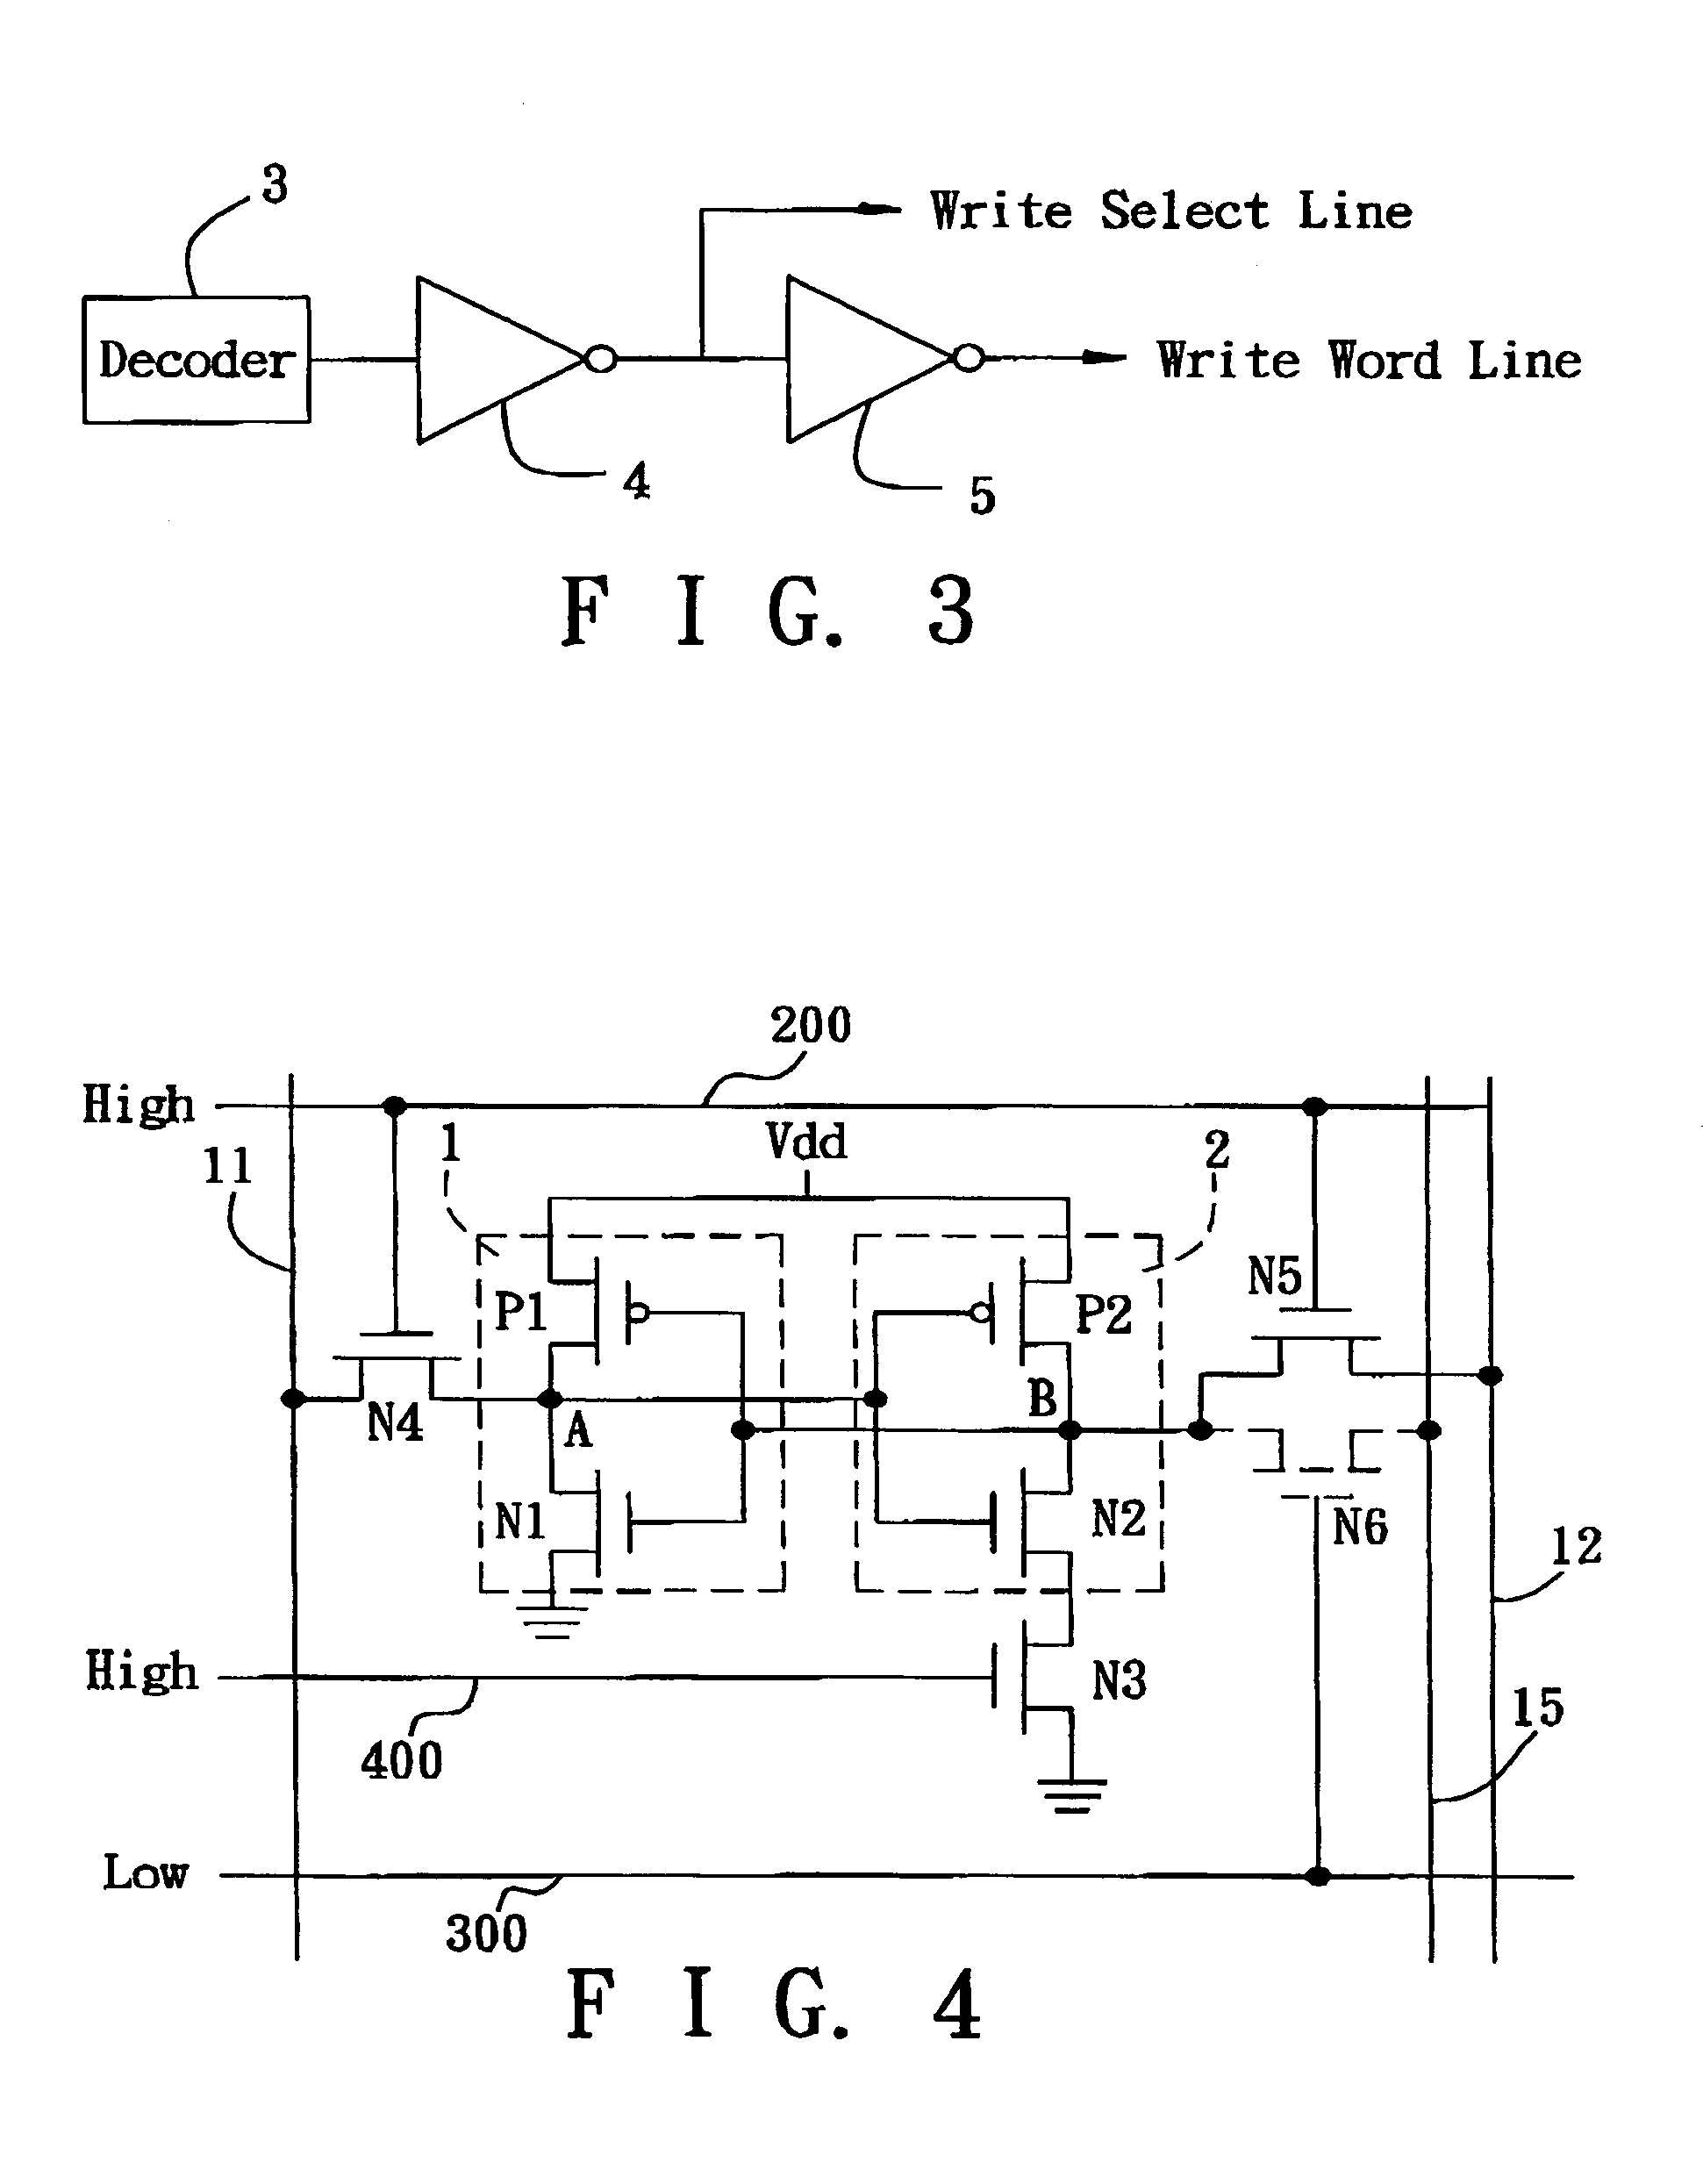 Low-power SRAM memory cell